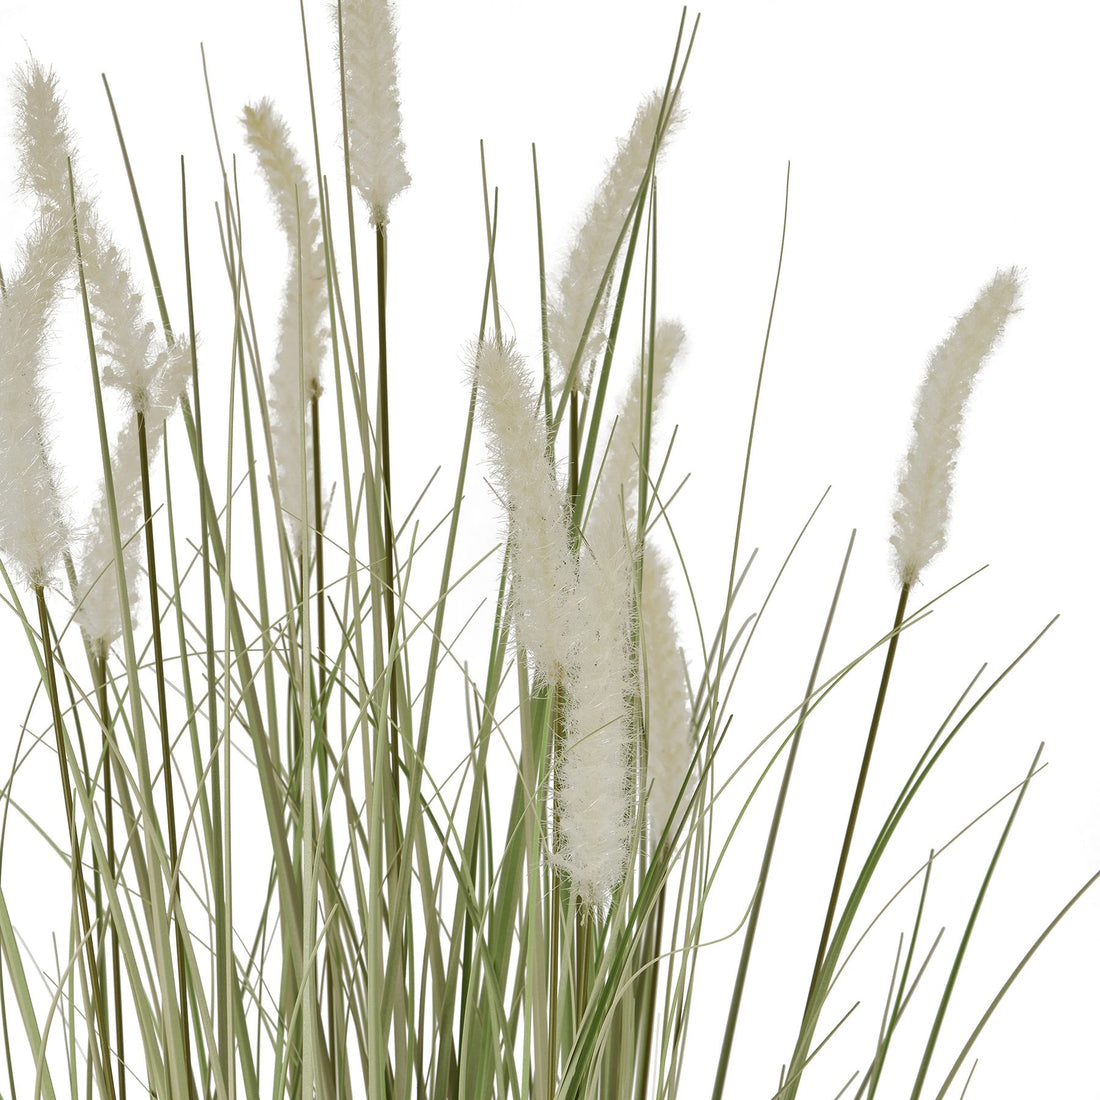 Large Bunny Tail Grass